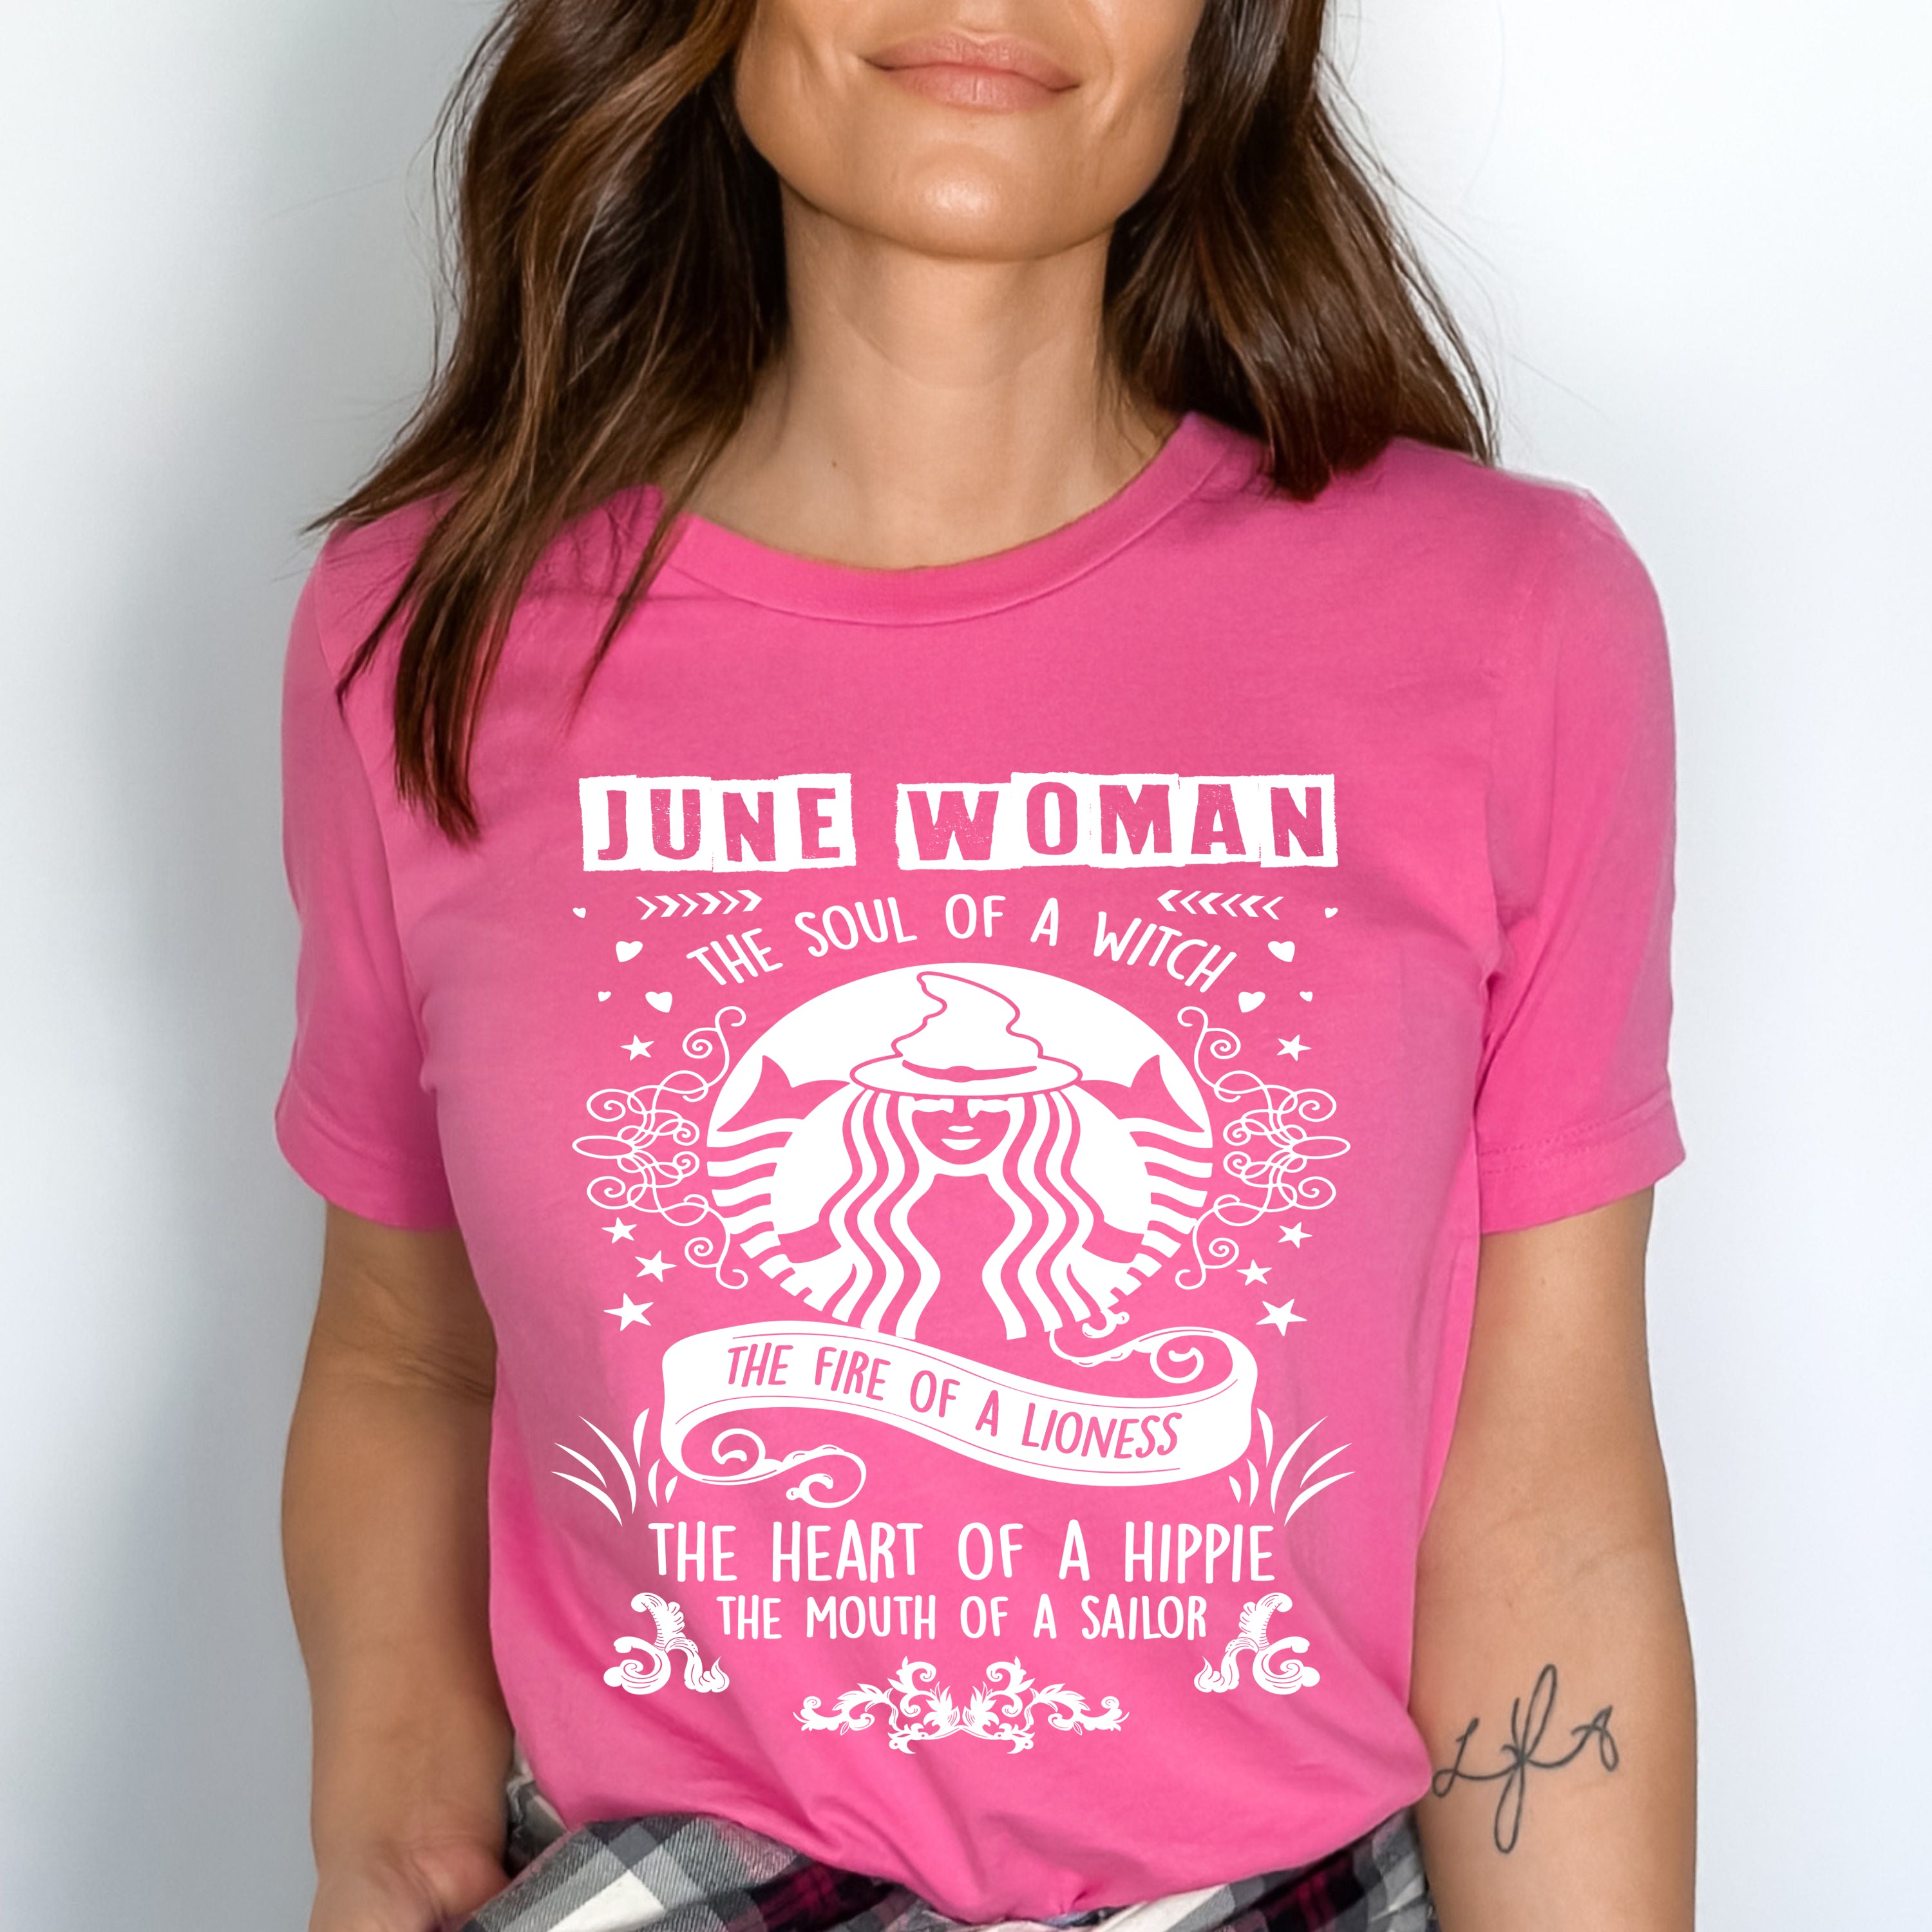 "JUNE WOMAN The Soul Of A Witch The Fire Of A Lioness The Heart Of A Hippie...",T-Shirt.